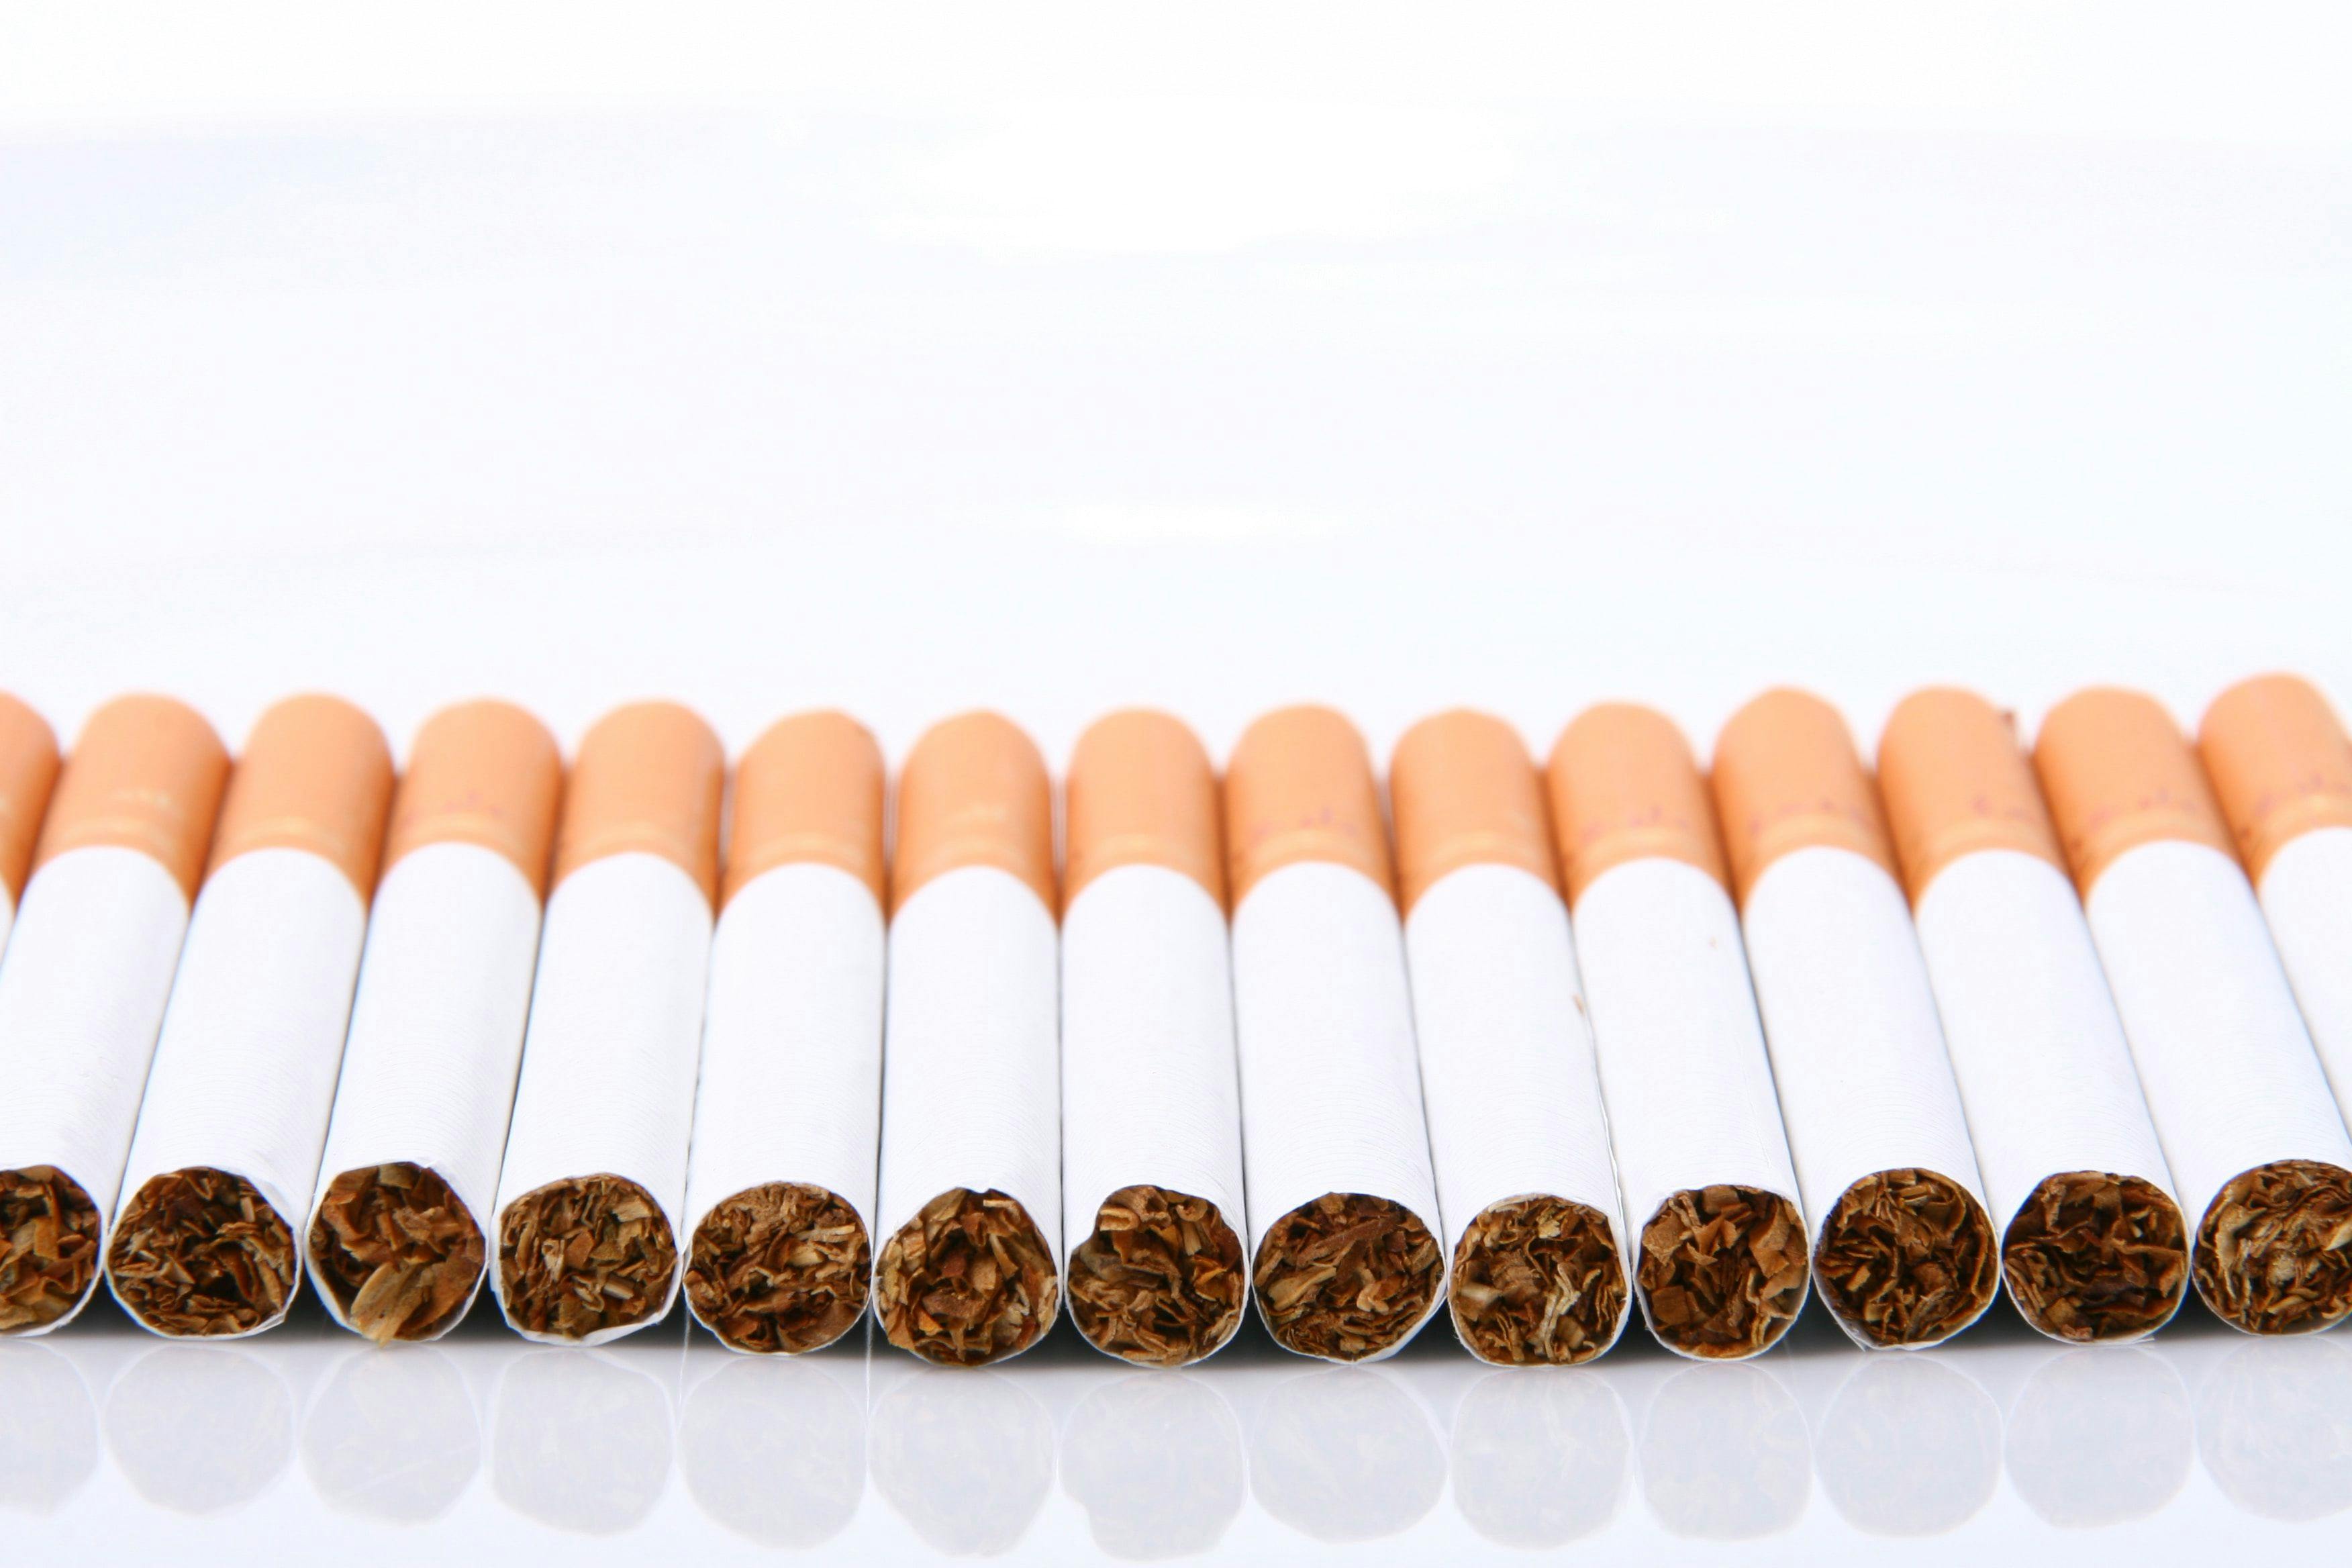 Tobacco taxes account for more than 1% of Luxembourg's GDP